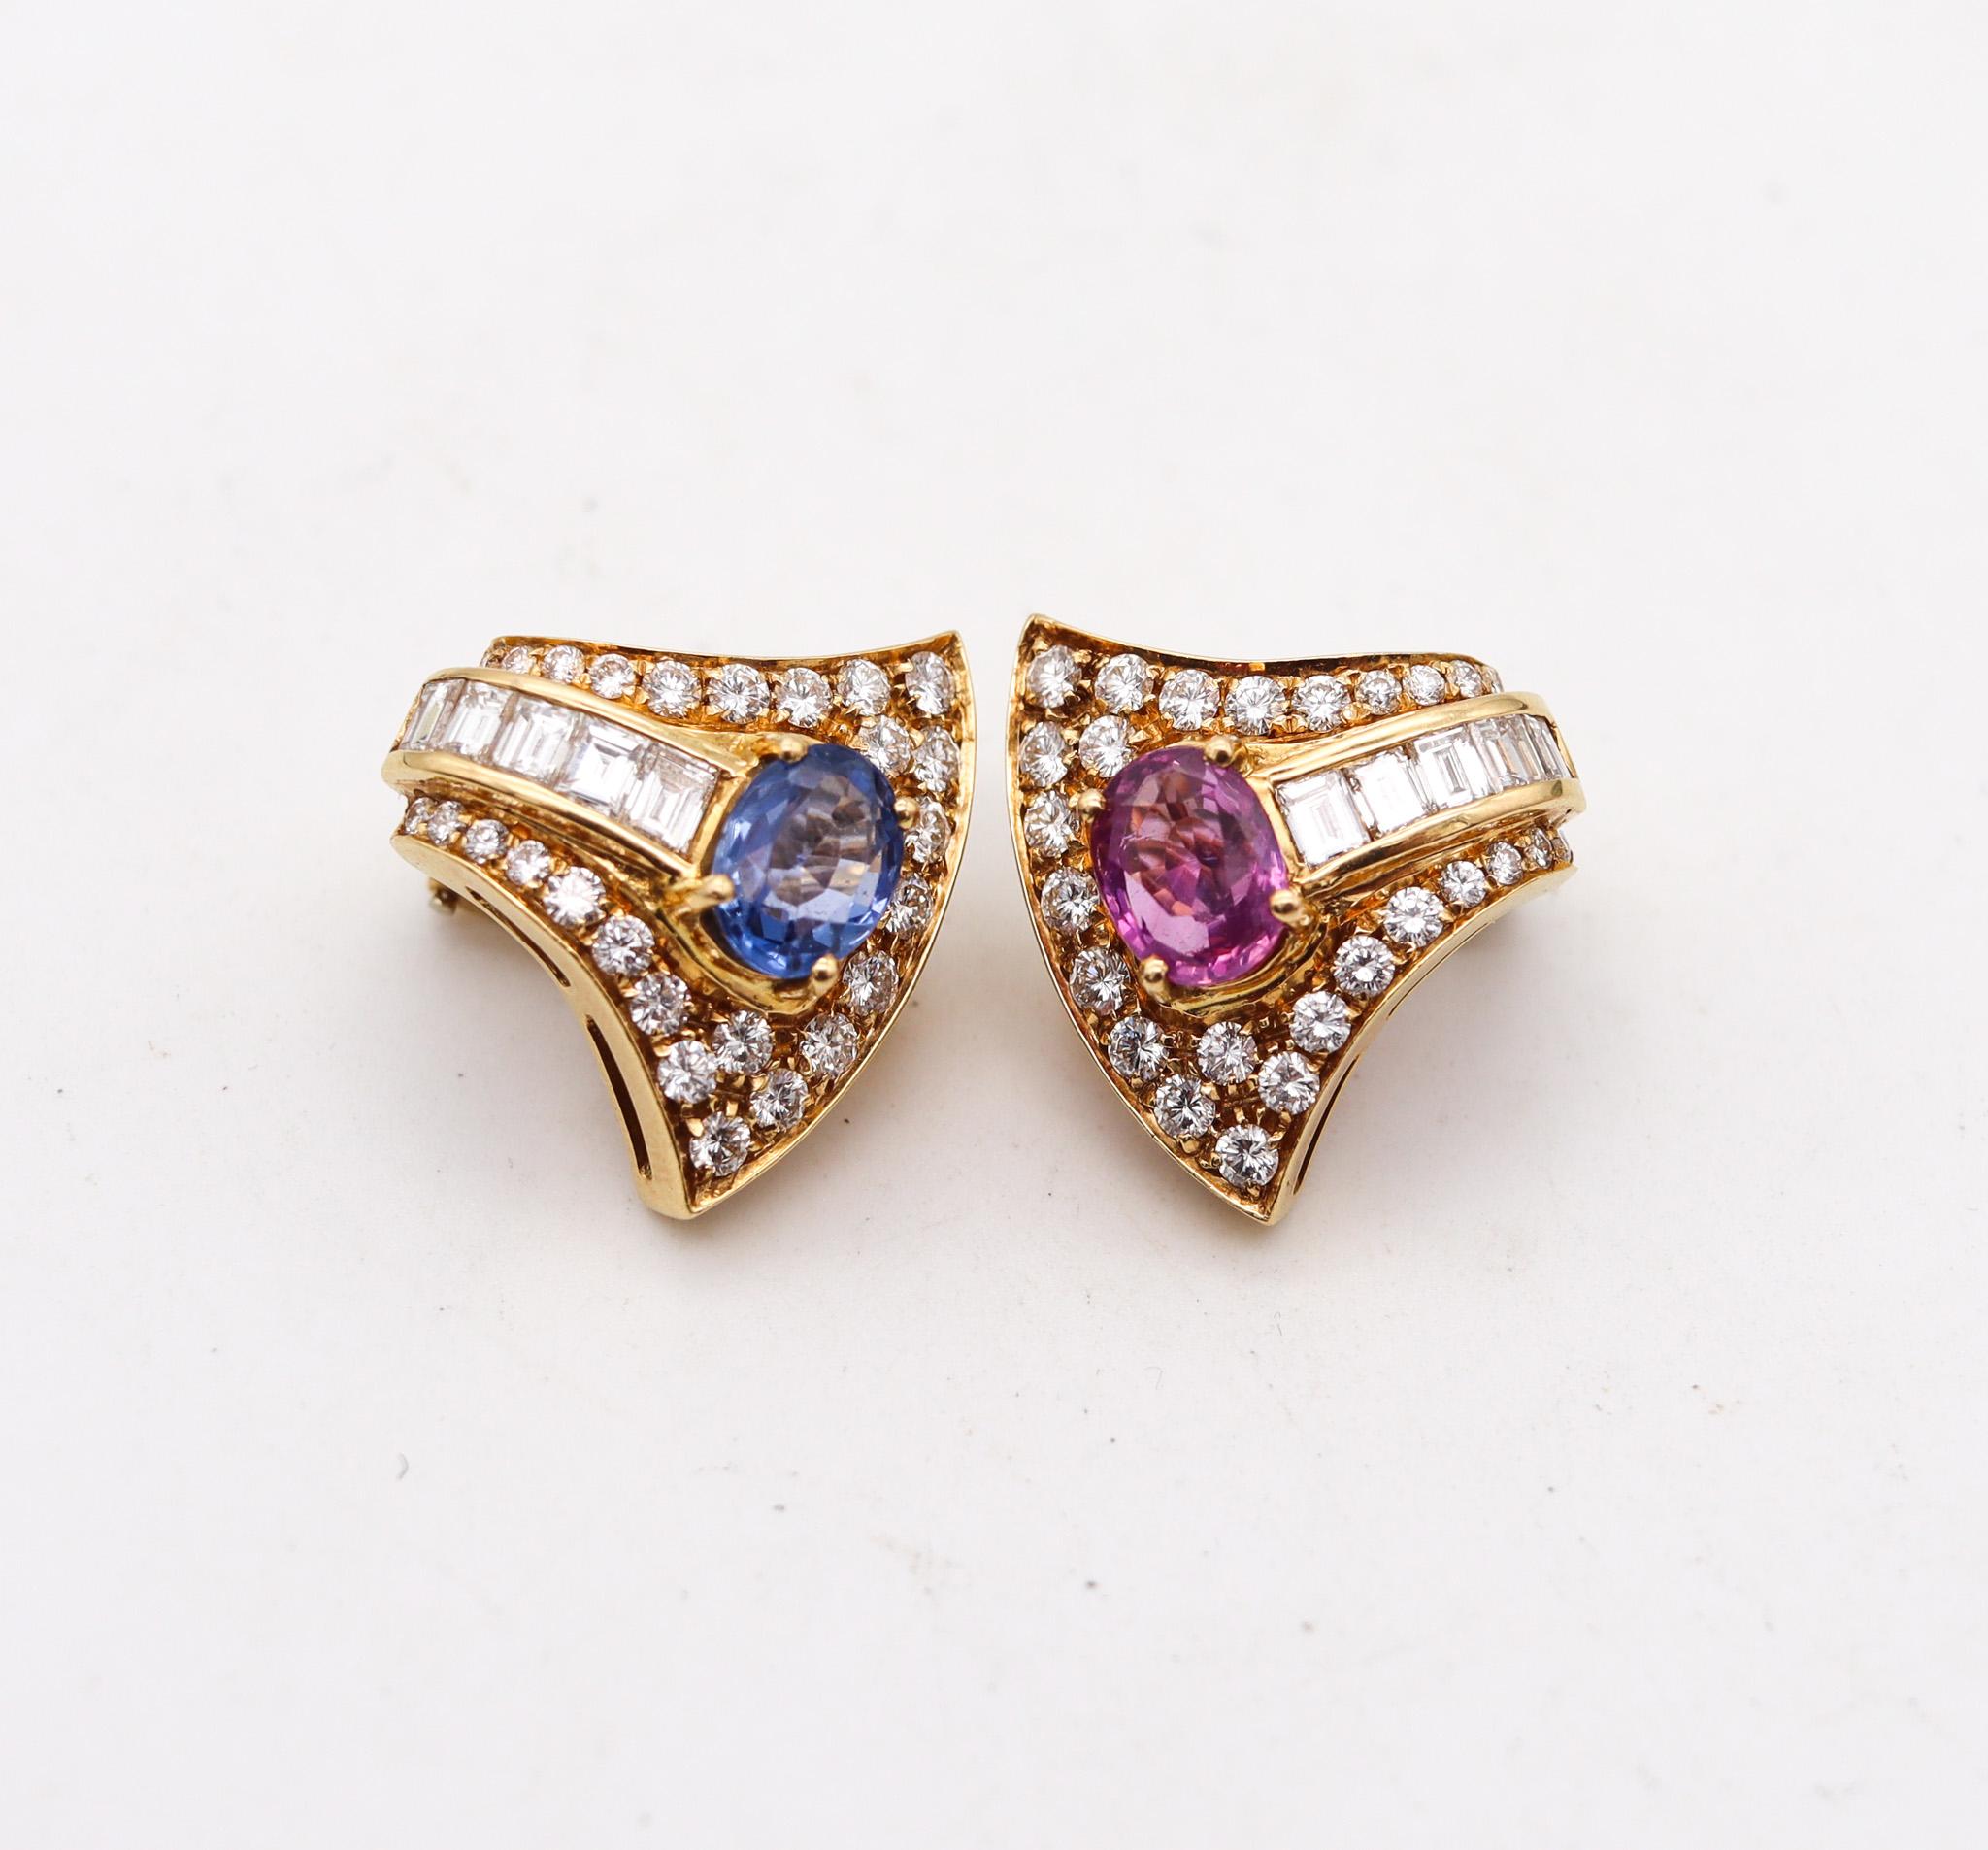 Modernist Bvlgari Clip On Earrings In 18Kt Yellow Gold With 8.93 Ctw Diamonds & Sapphires For Sale